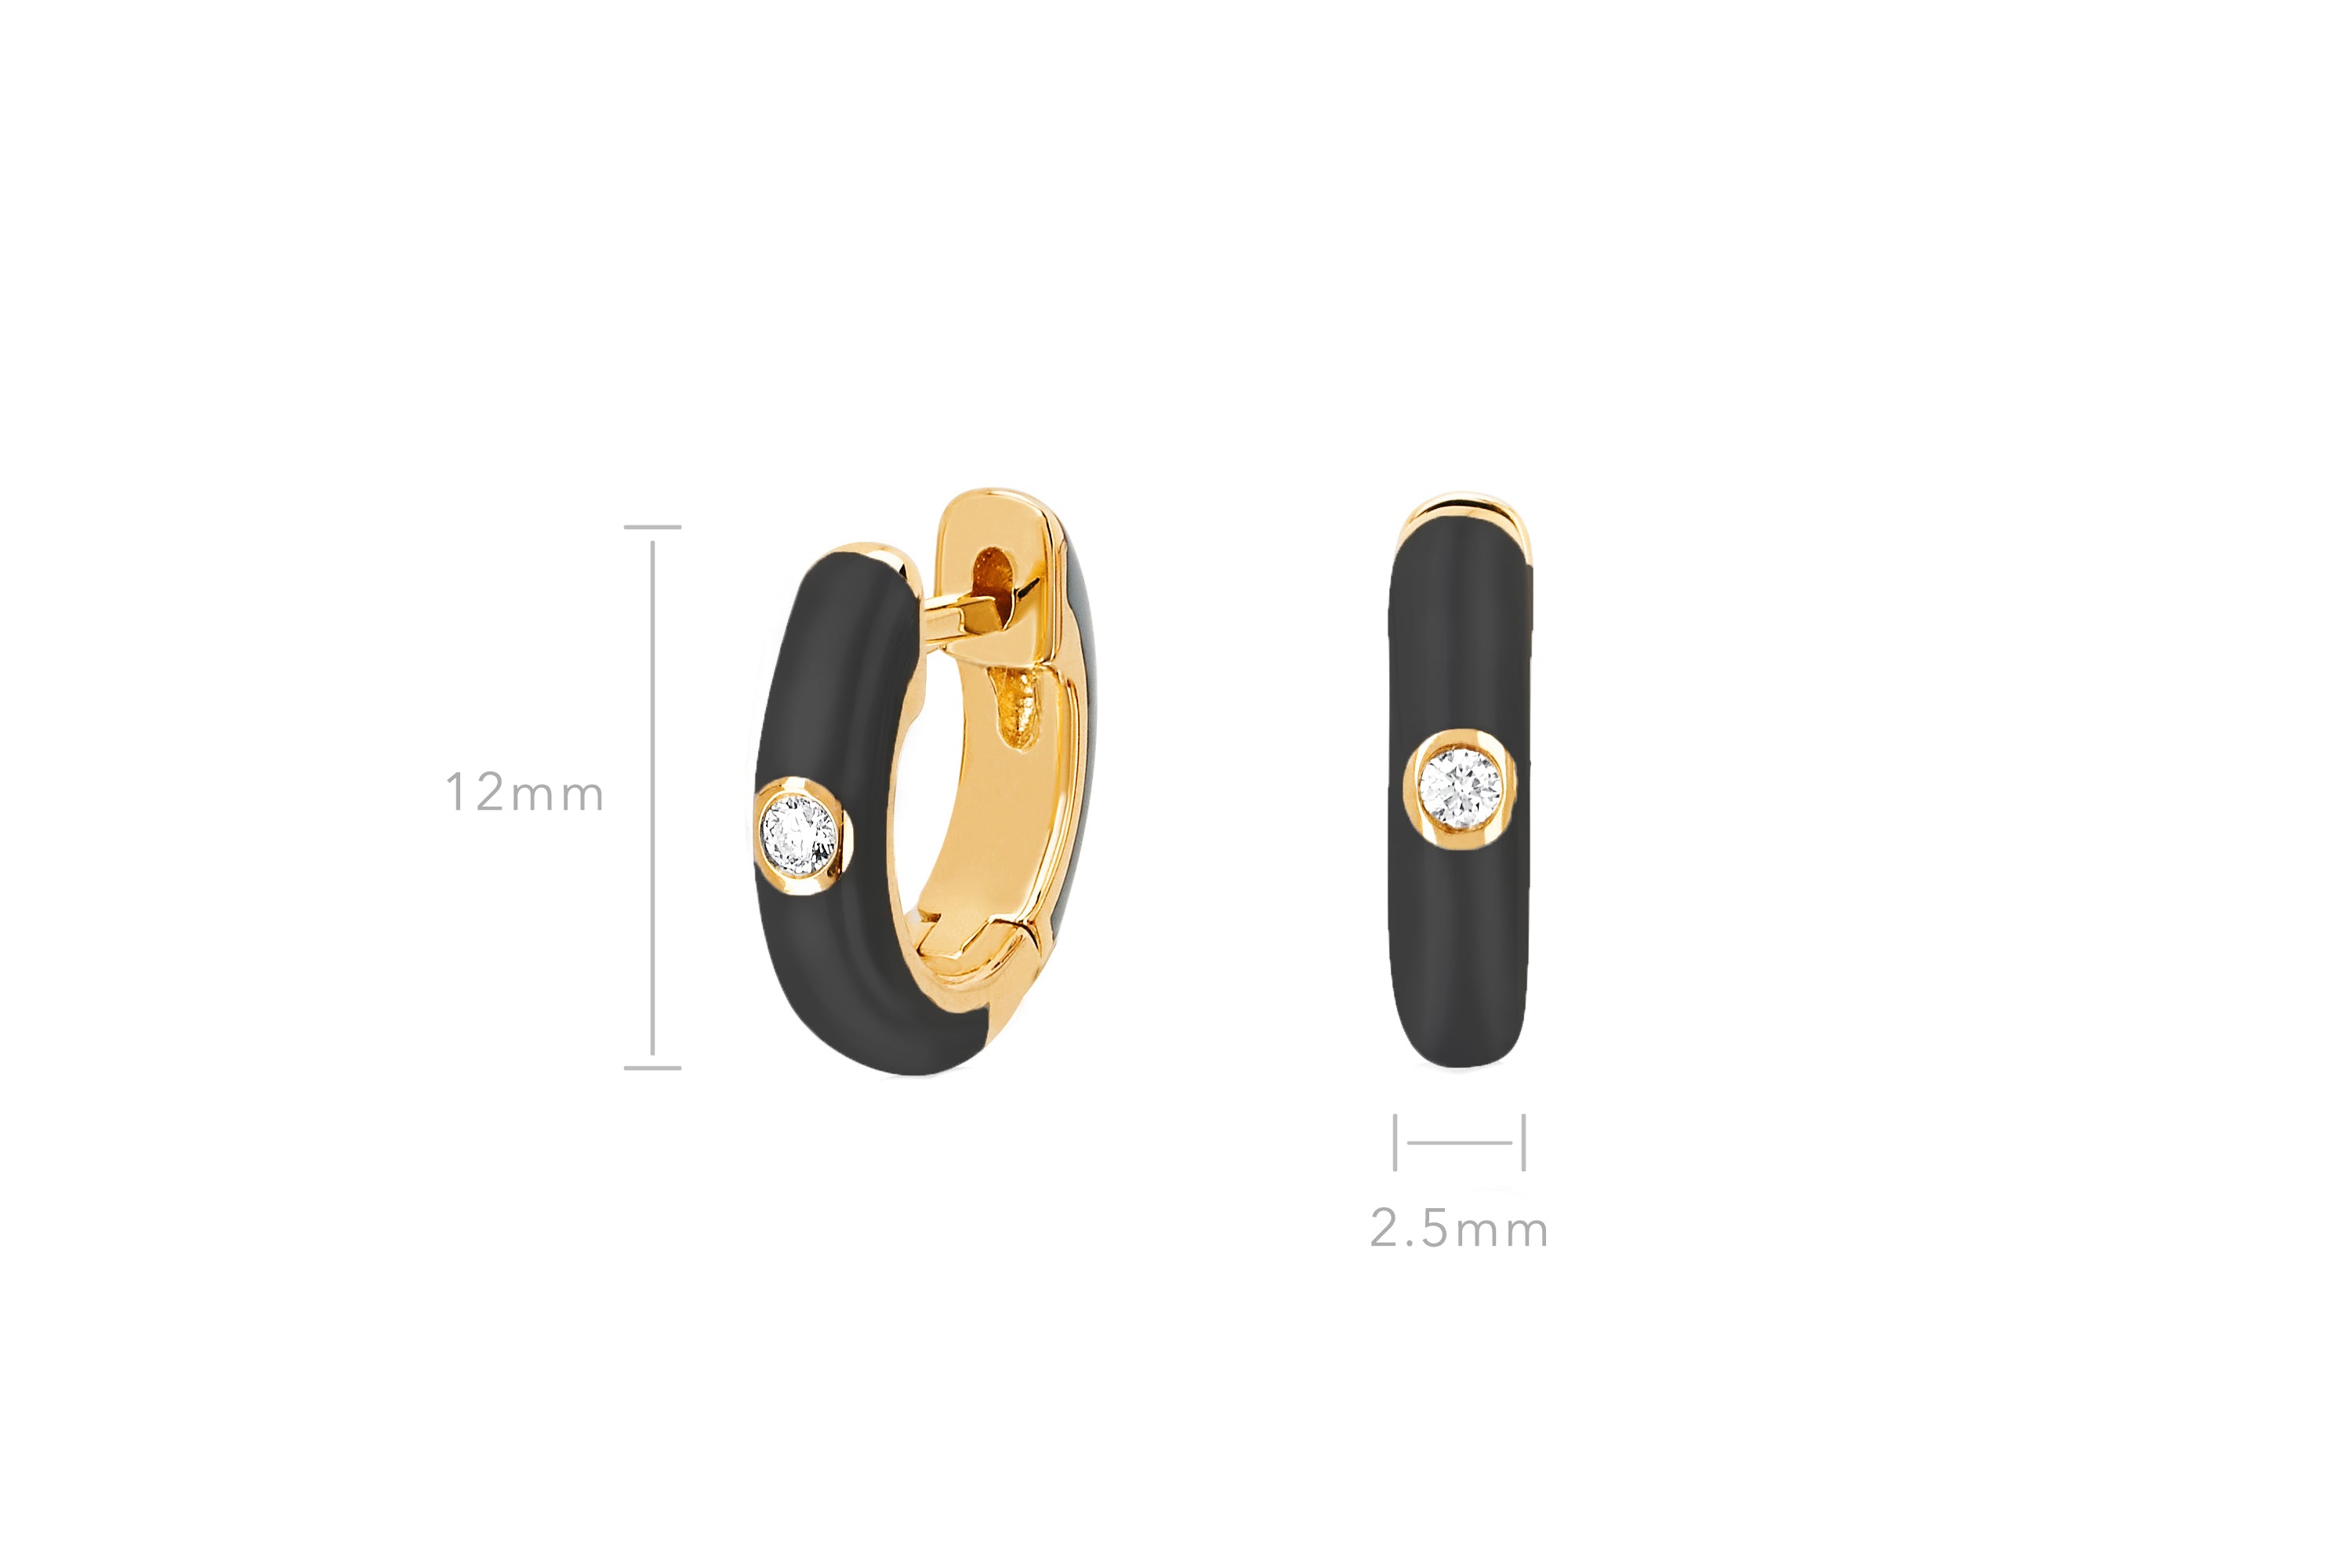 Diamond & Slate Enamel Huggie Earring in 14k yellow gold with size measurement of 12mm height and 2.5mm in width